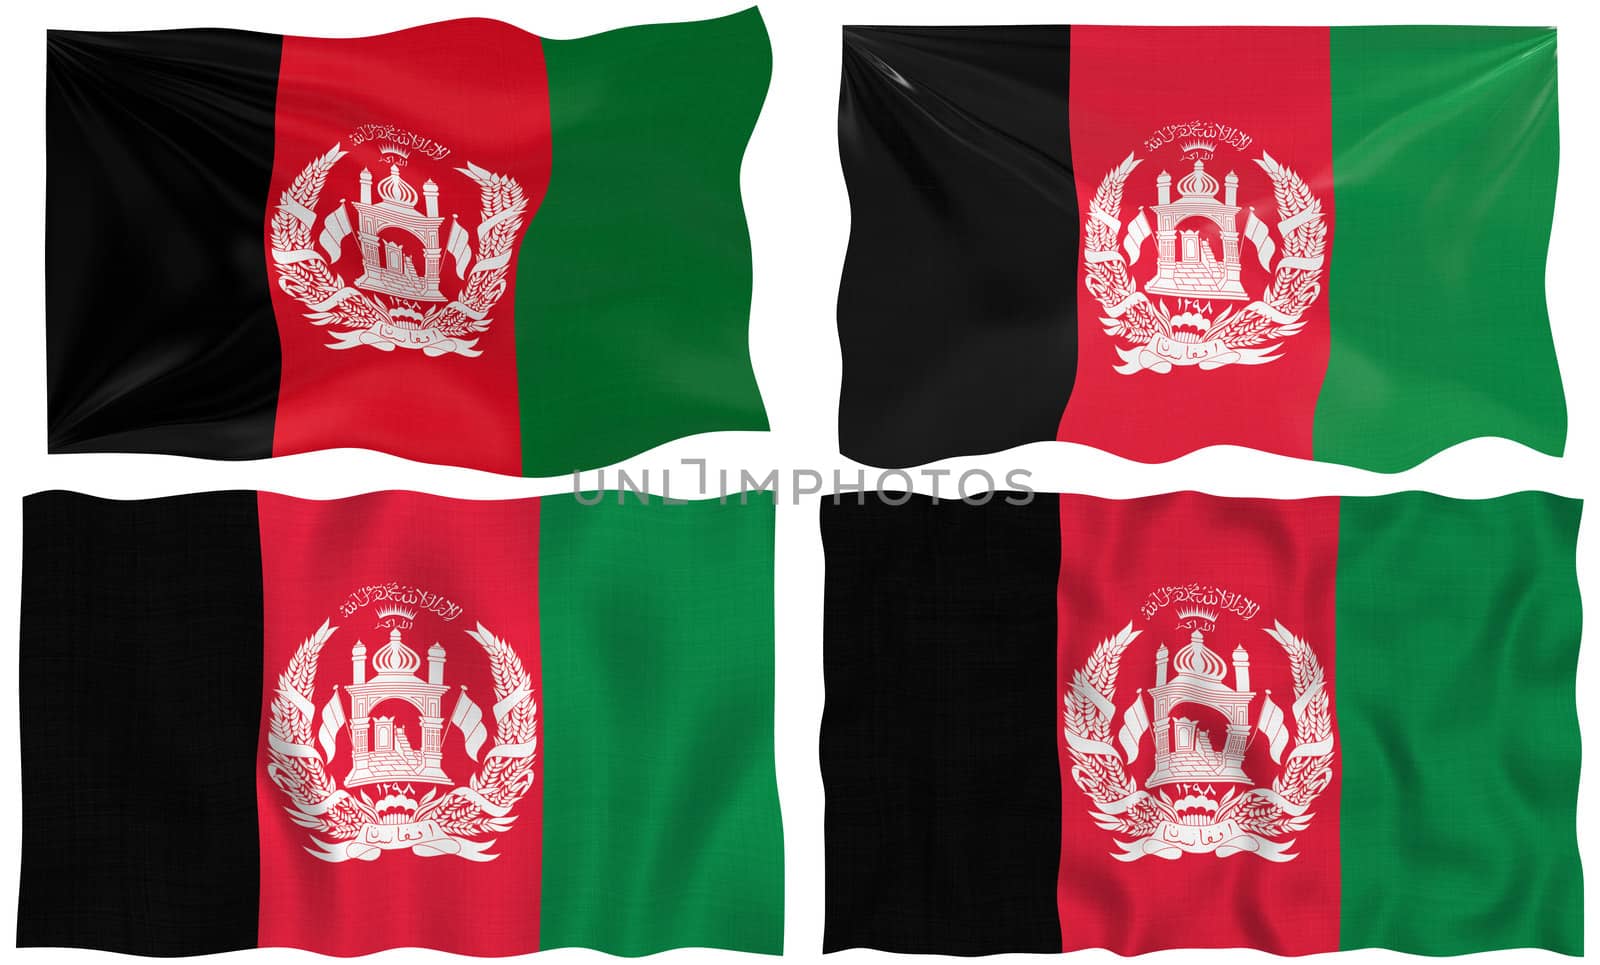 four Great Images of the Flag of afghanistan